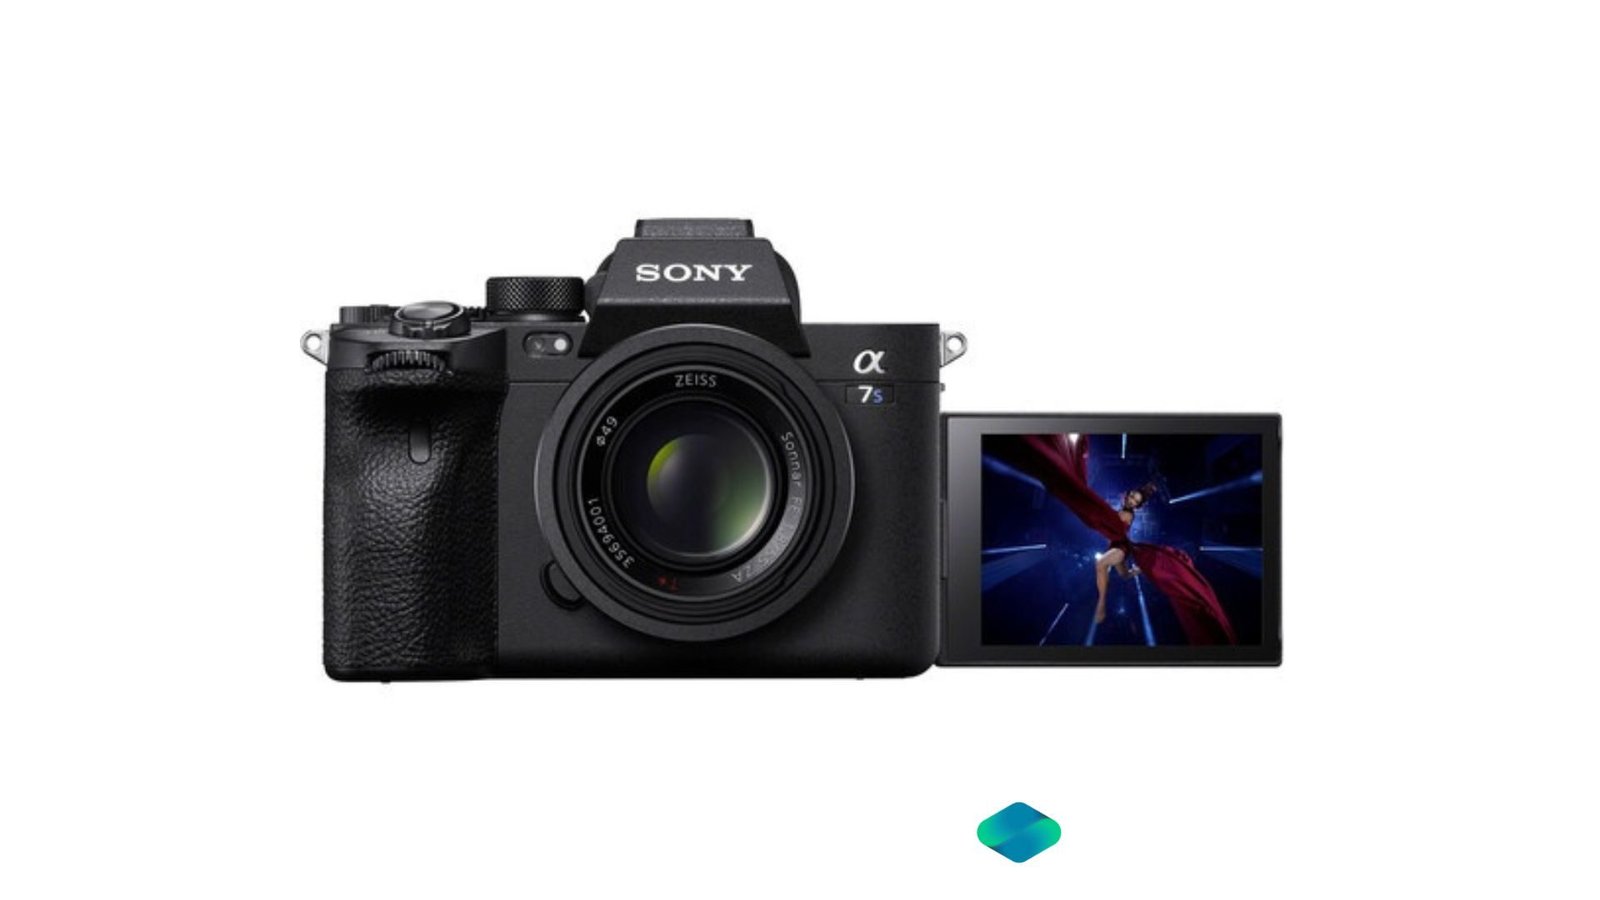 Rent Sony - A7S - III (Body) with Metabone Adapter in Delhi NCR, Rent Camera, Camera accessories, Camera lenses for rent, in Delhi Gurgaon Noida, hire Shooting equipment, Lighting equipment rental, Film gear rental for Video production, camera rental company in Delhi, film equipment rental company